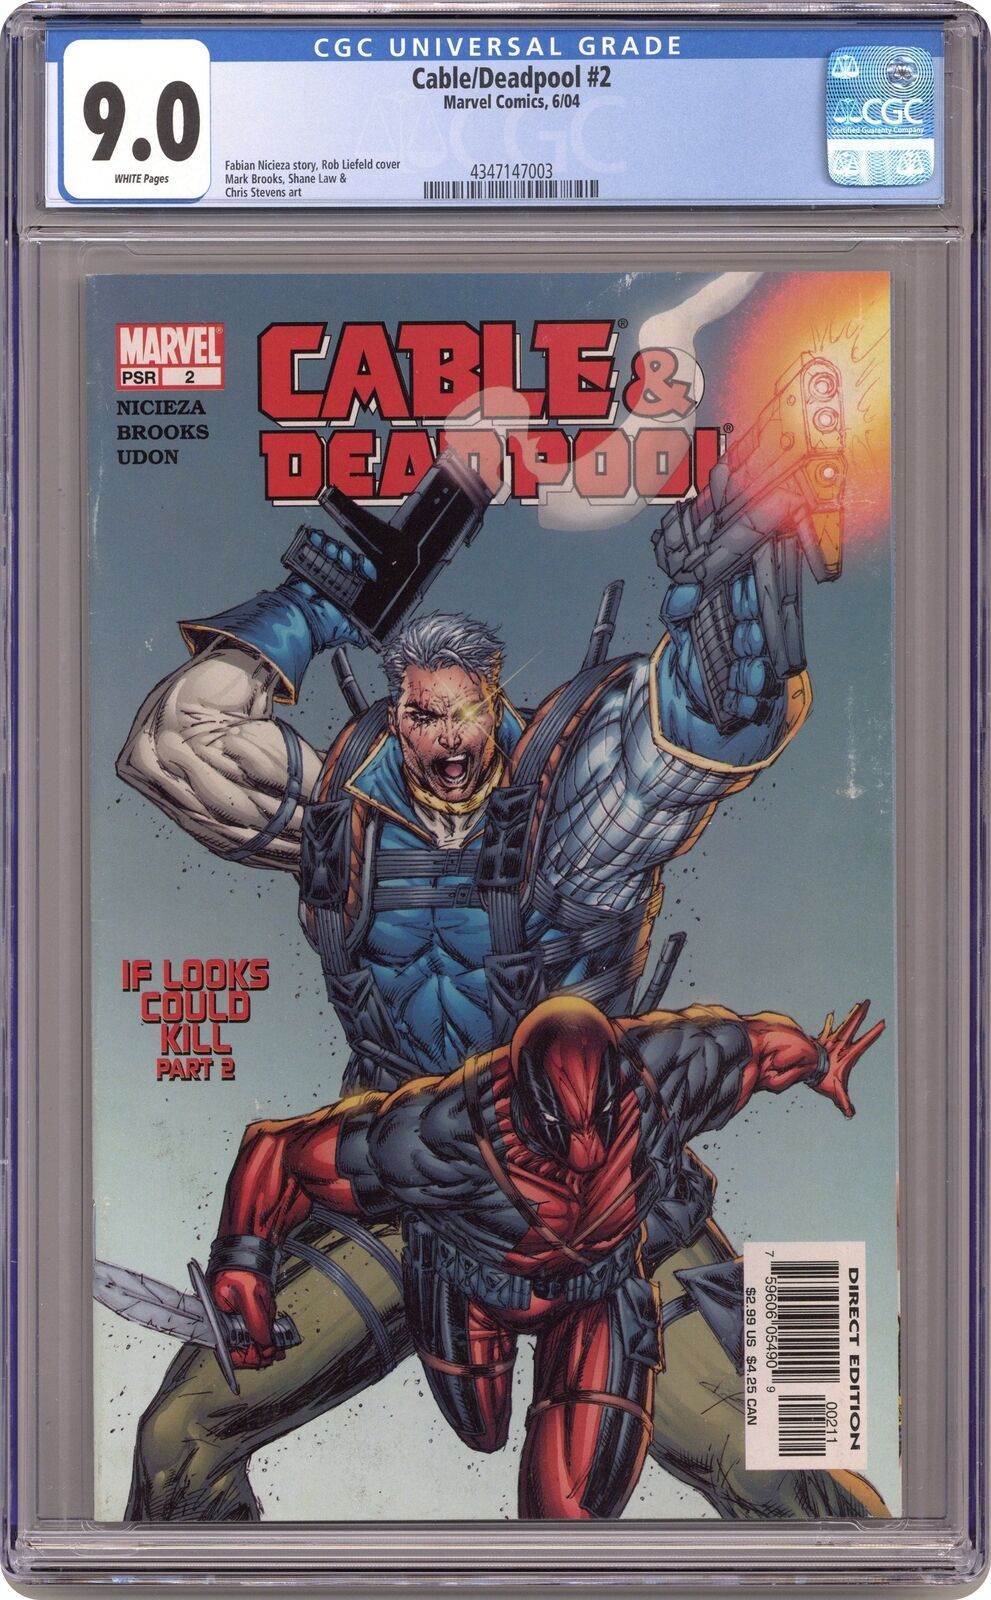 Cable and Deadpool #2 CGC 9.0 2004 4347147003